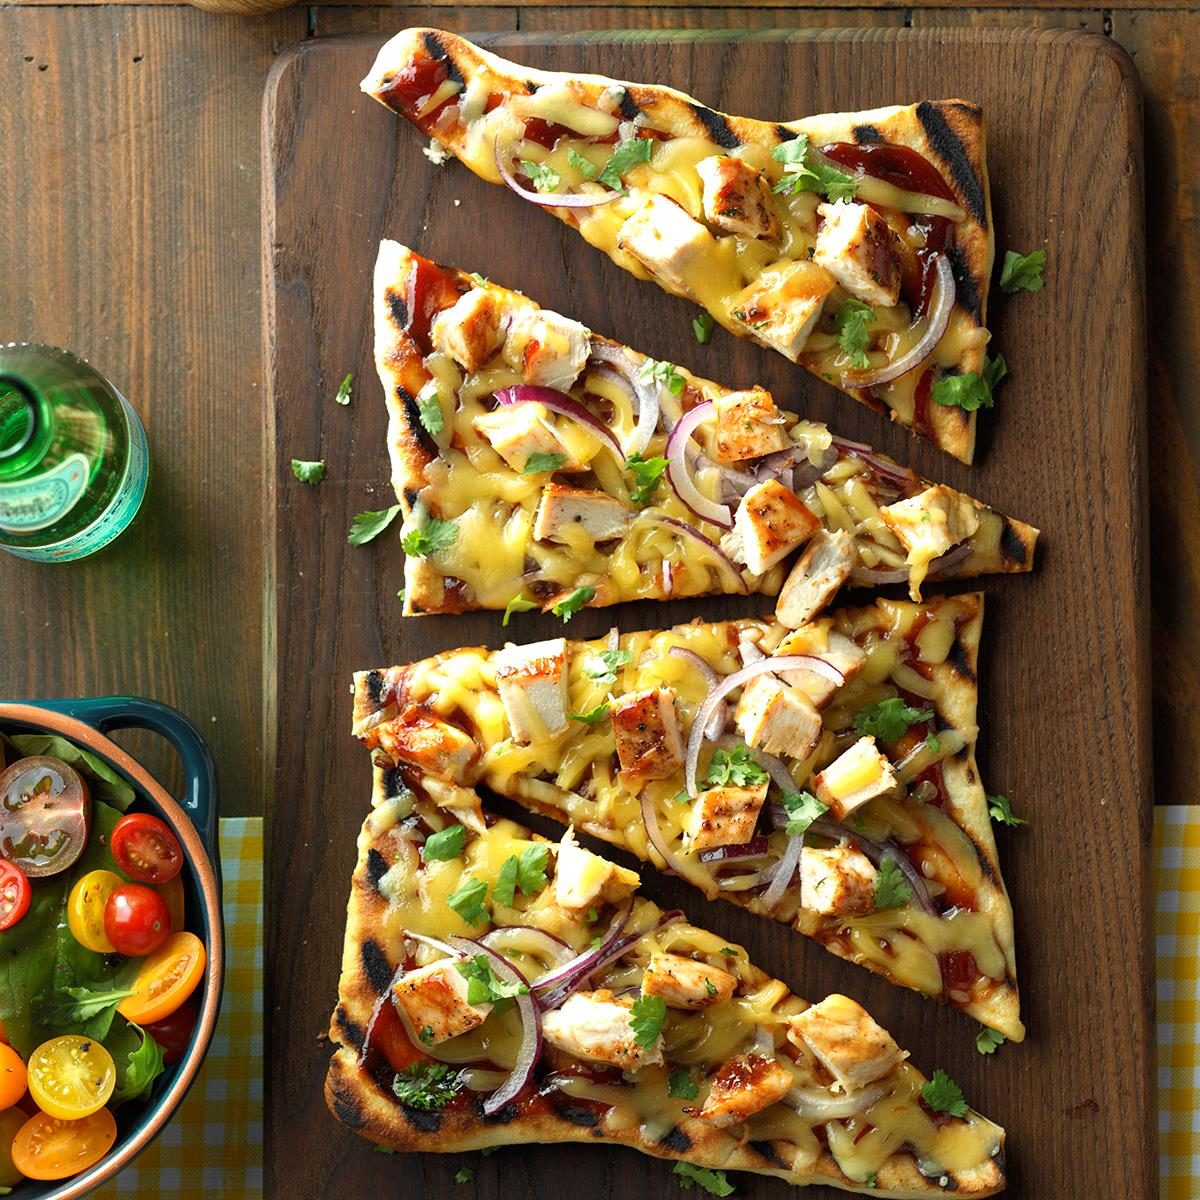 <p>So fast and so easy with refrigerated pizza crust, these saucy, smoky pizzas make quick fans with their rustic, hot-off-the-grill flavor. They're perfect for impromptu cookouts and summer dinners on the patio. —Alicia Trevithick, Temecula, California</p> <div class="listicle-page__buttons"> <div class="listicle-page__cta-button"><a href='https://www.tasteofhome.com/recipes/barbecued-chicken-pizzas/'>Go to Recipe</a></div> </div>